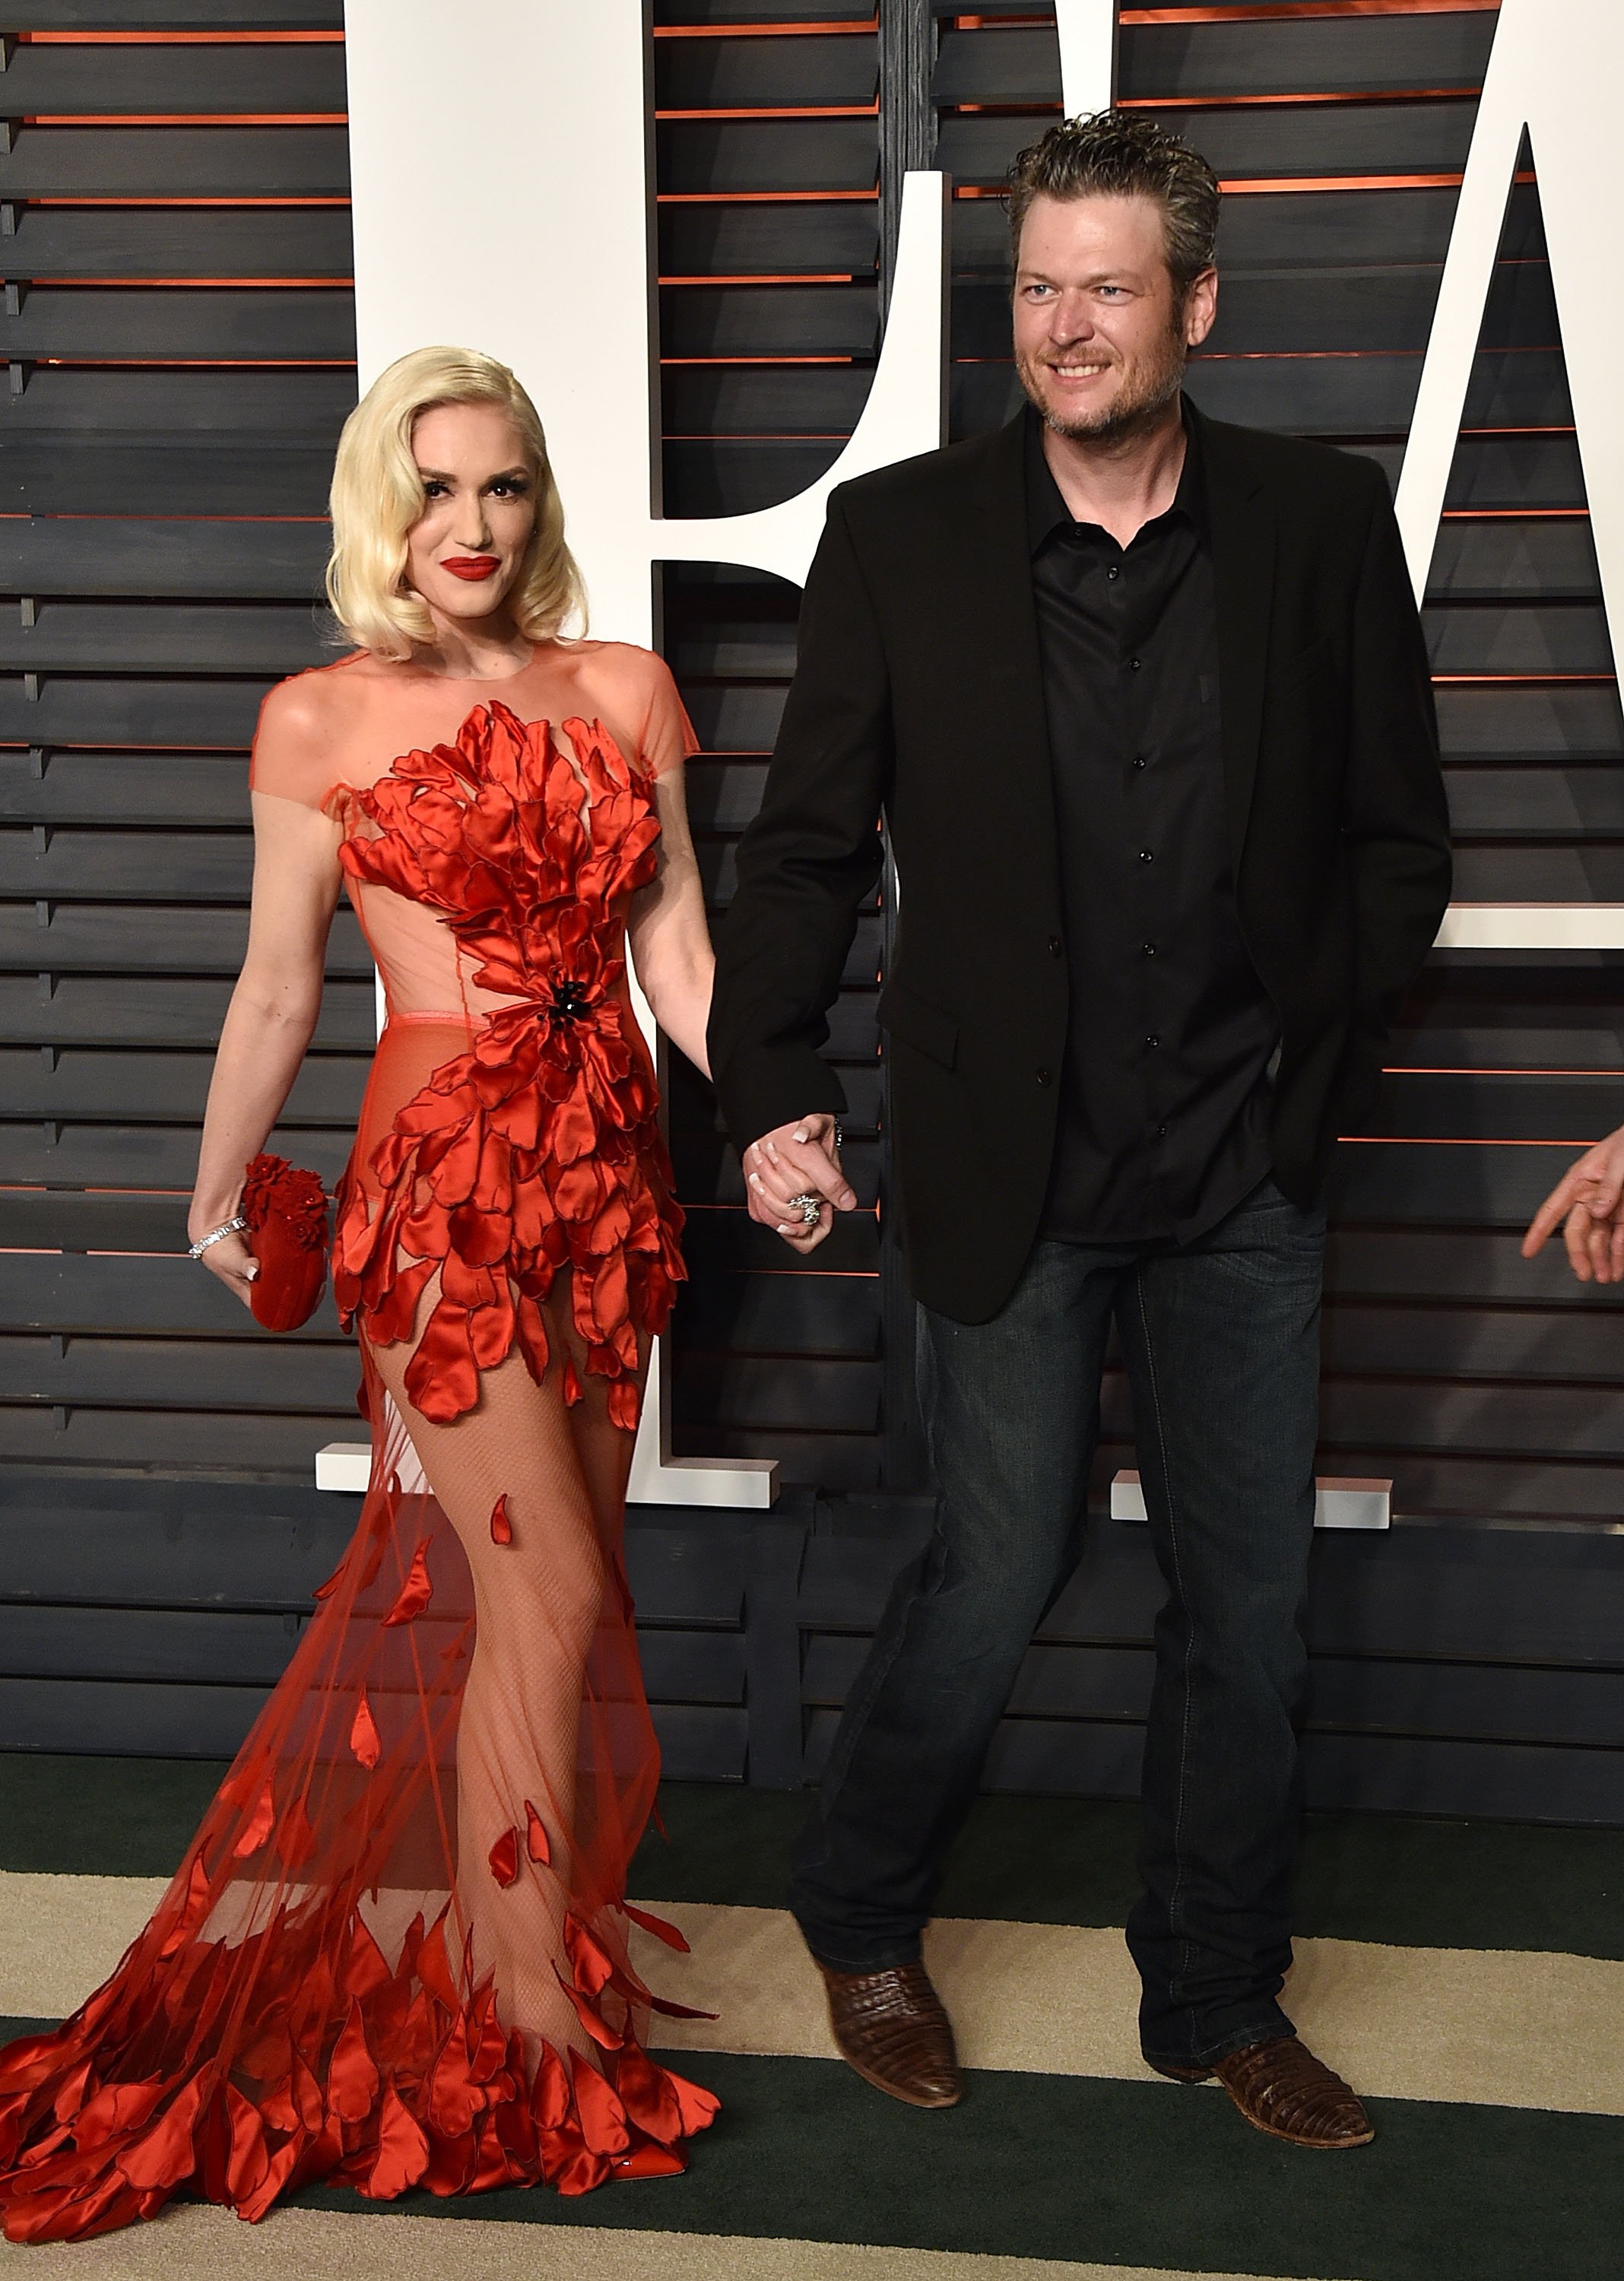 Gwen Stefani and Blake Shelton arrive at the 2016 Vanity Fair Oscar Party at Wallis Annenberg Center for the Performing Arts on February 28, 2016 in Beverly Hills, California | Photo: Getty Images